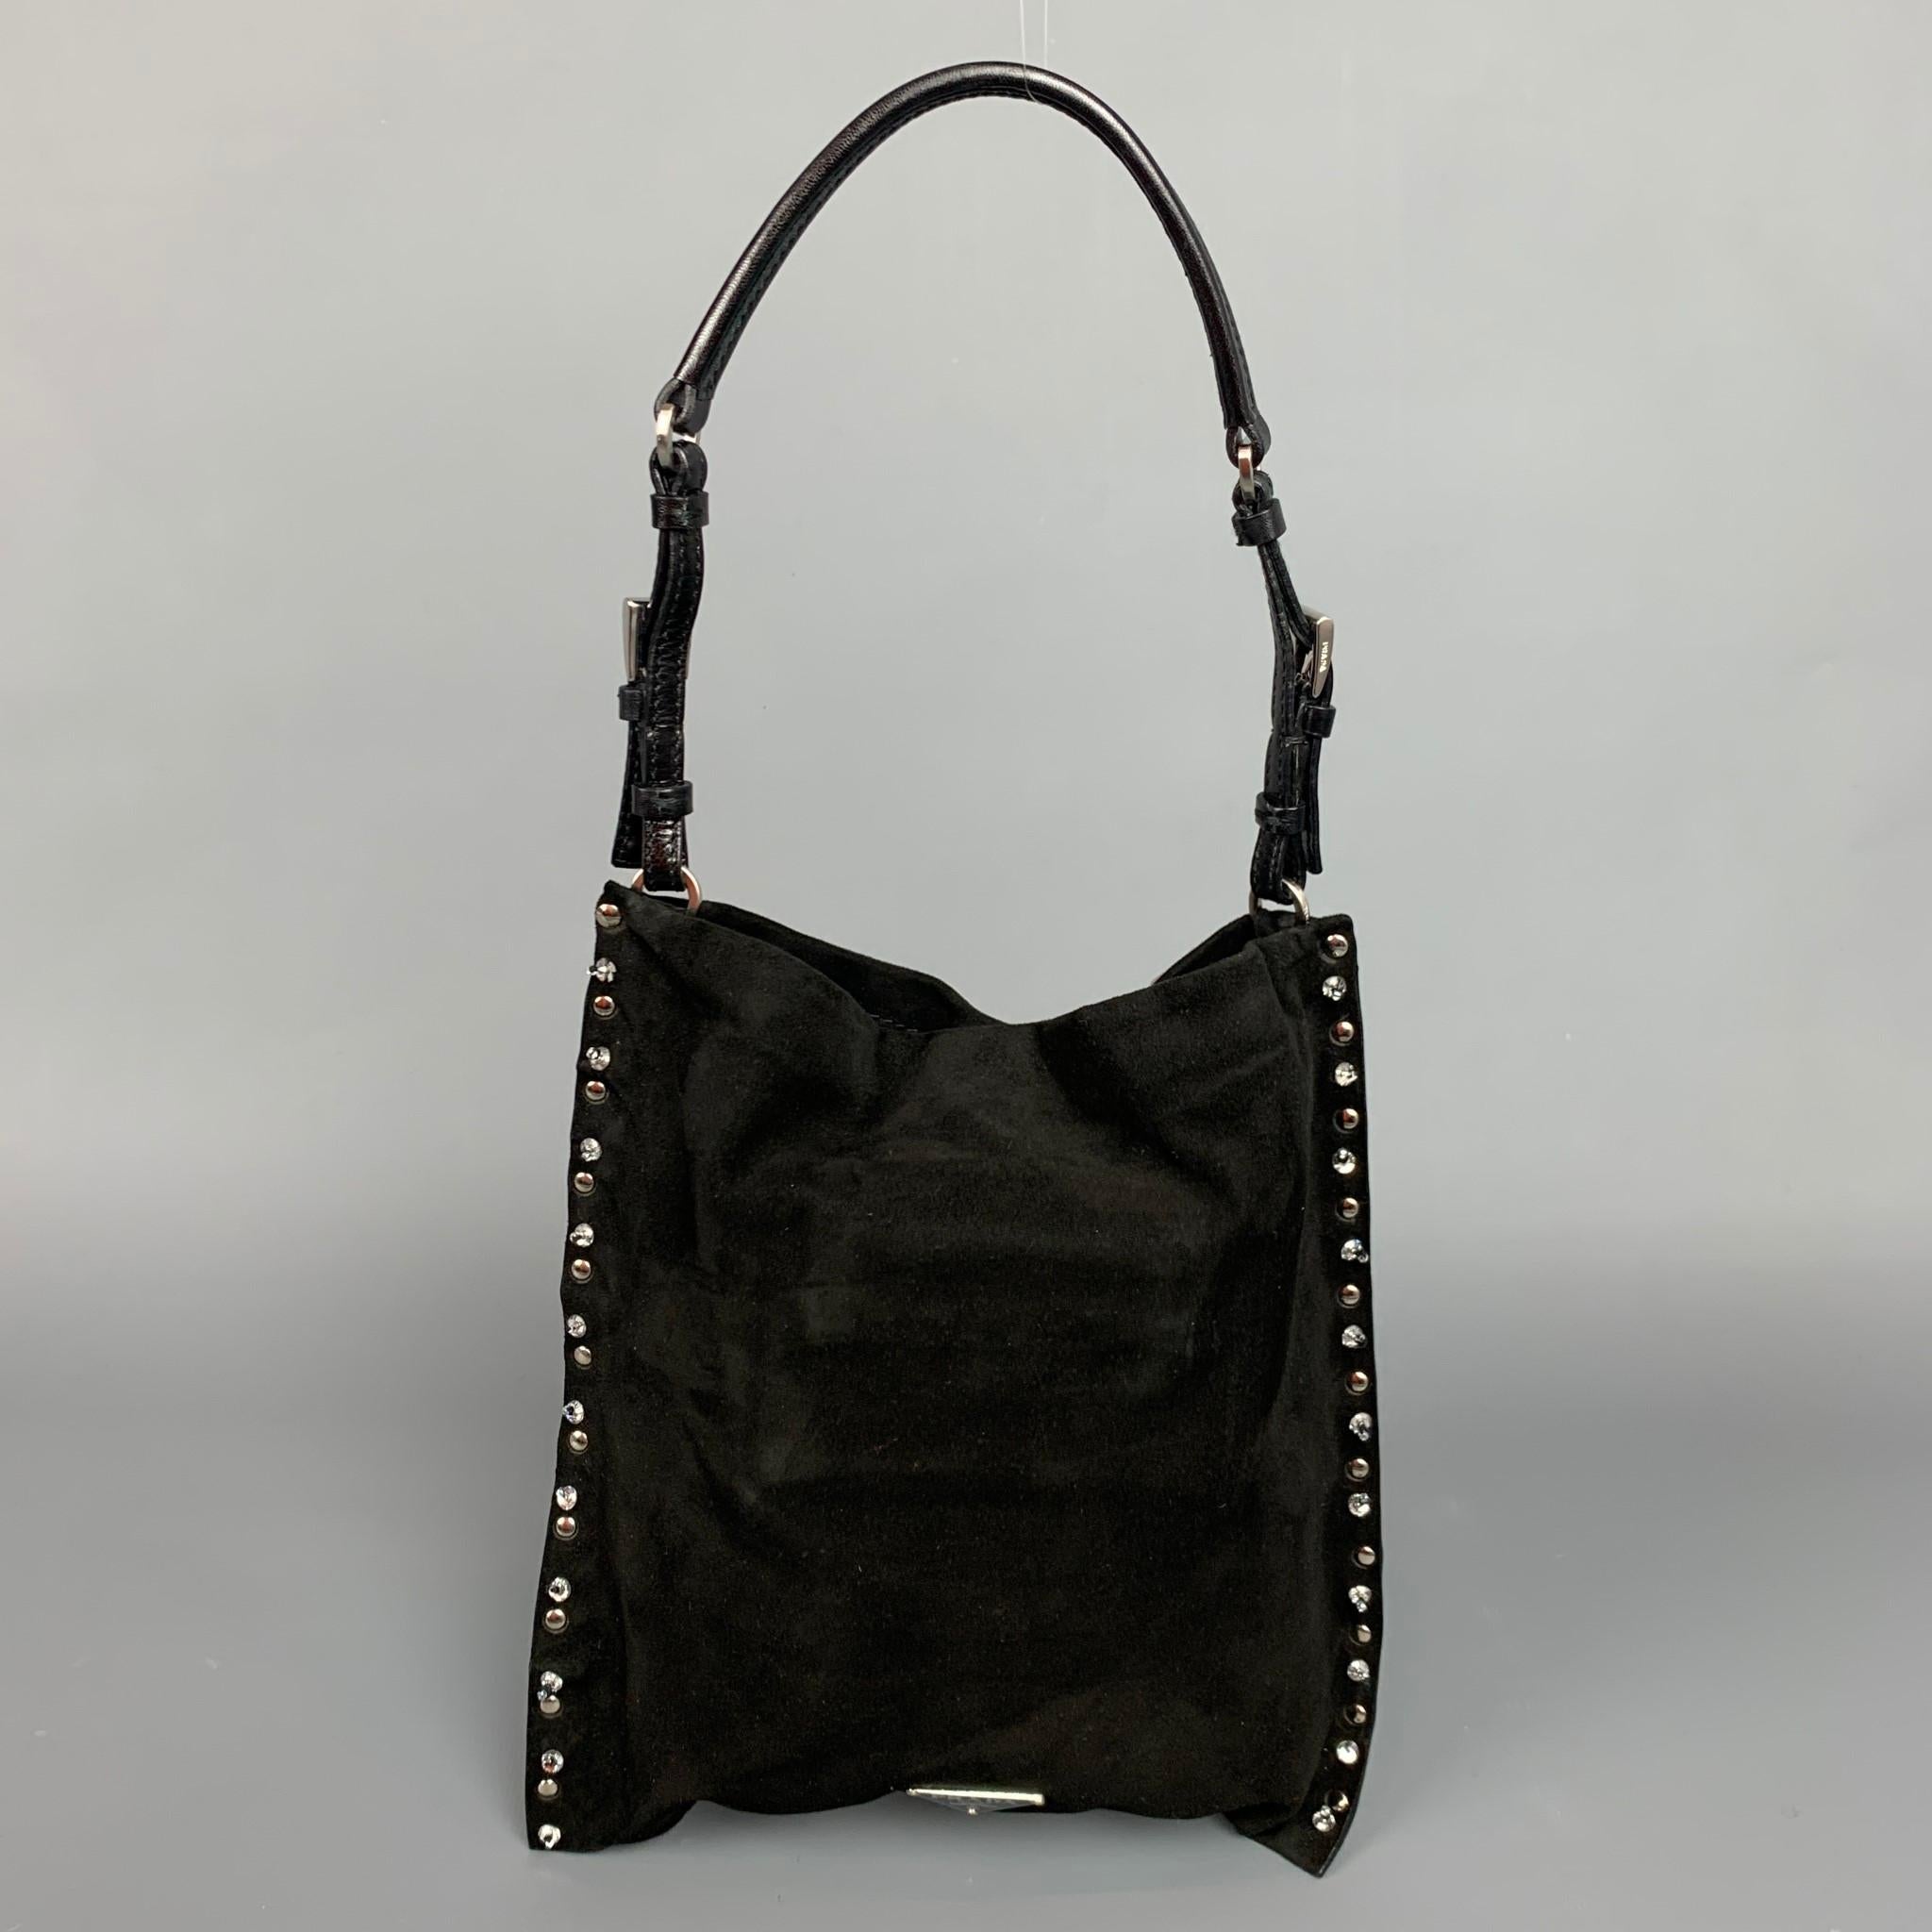 PRADA handbag comes in a black suede with a nude satin liner featuring embellished rhinestones, adjustable top handle, inner pocket, and a snap button closure. Comes with dust bag and identification cards. Made in Italy.

Very Good Pre-Owned